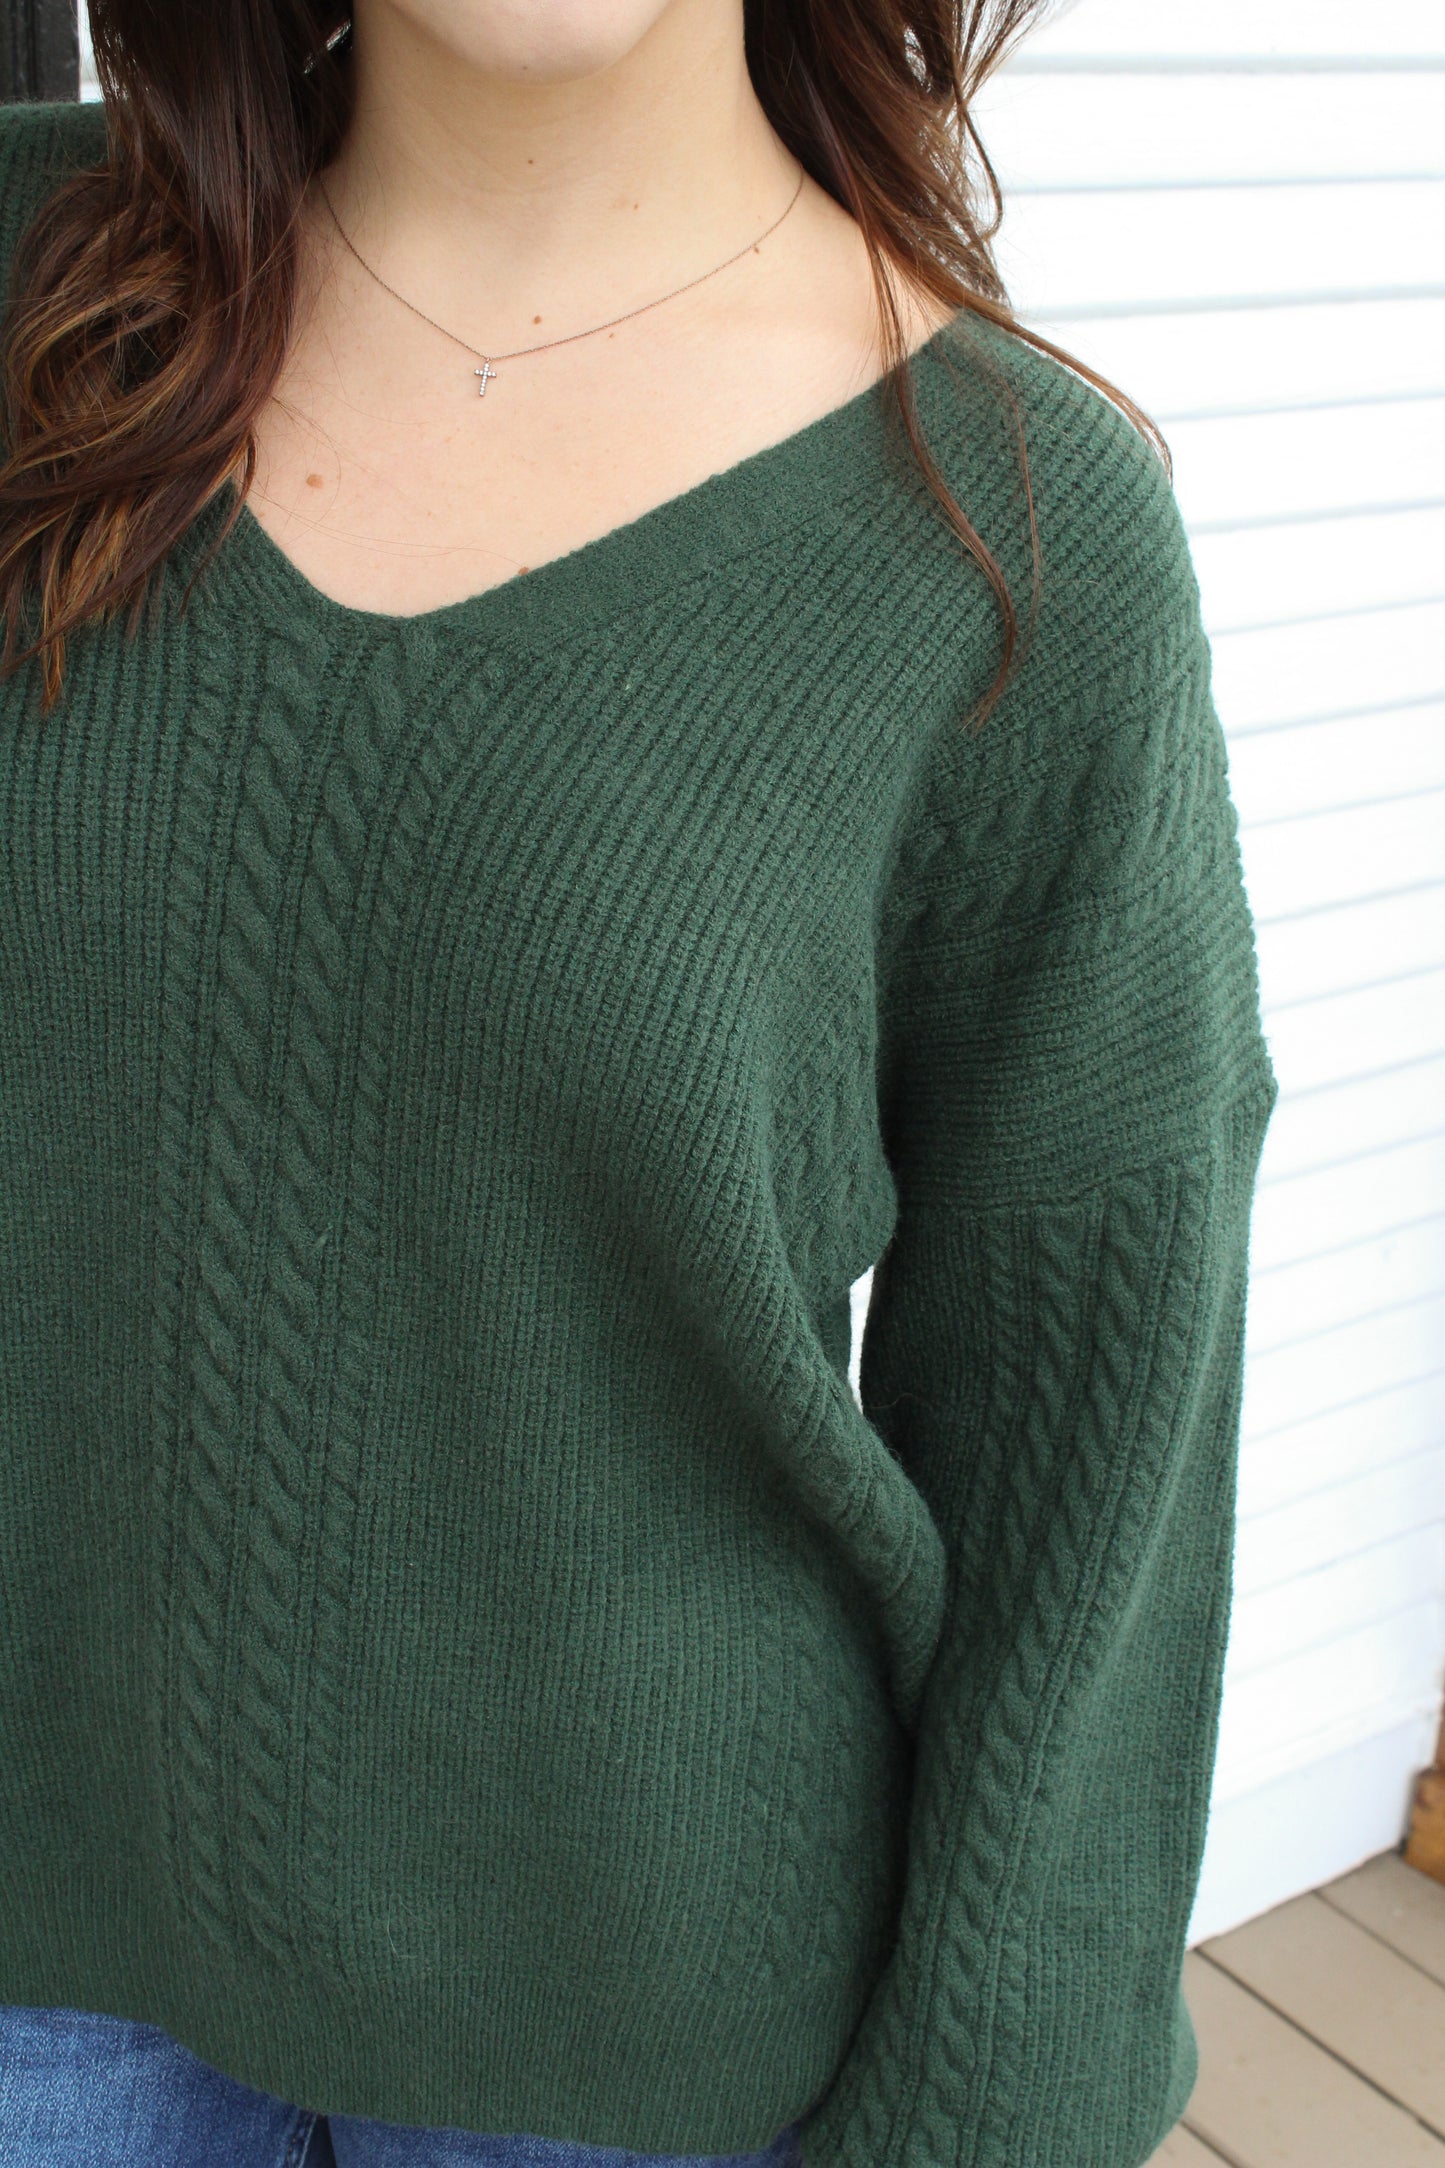 Teal Braided Sweater